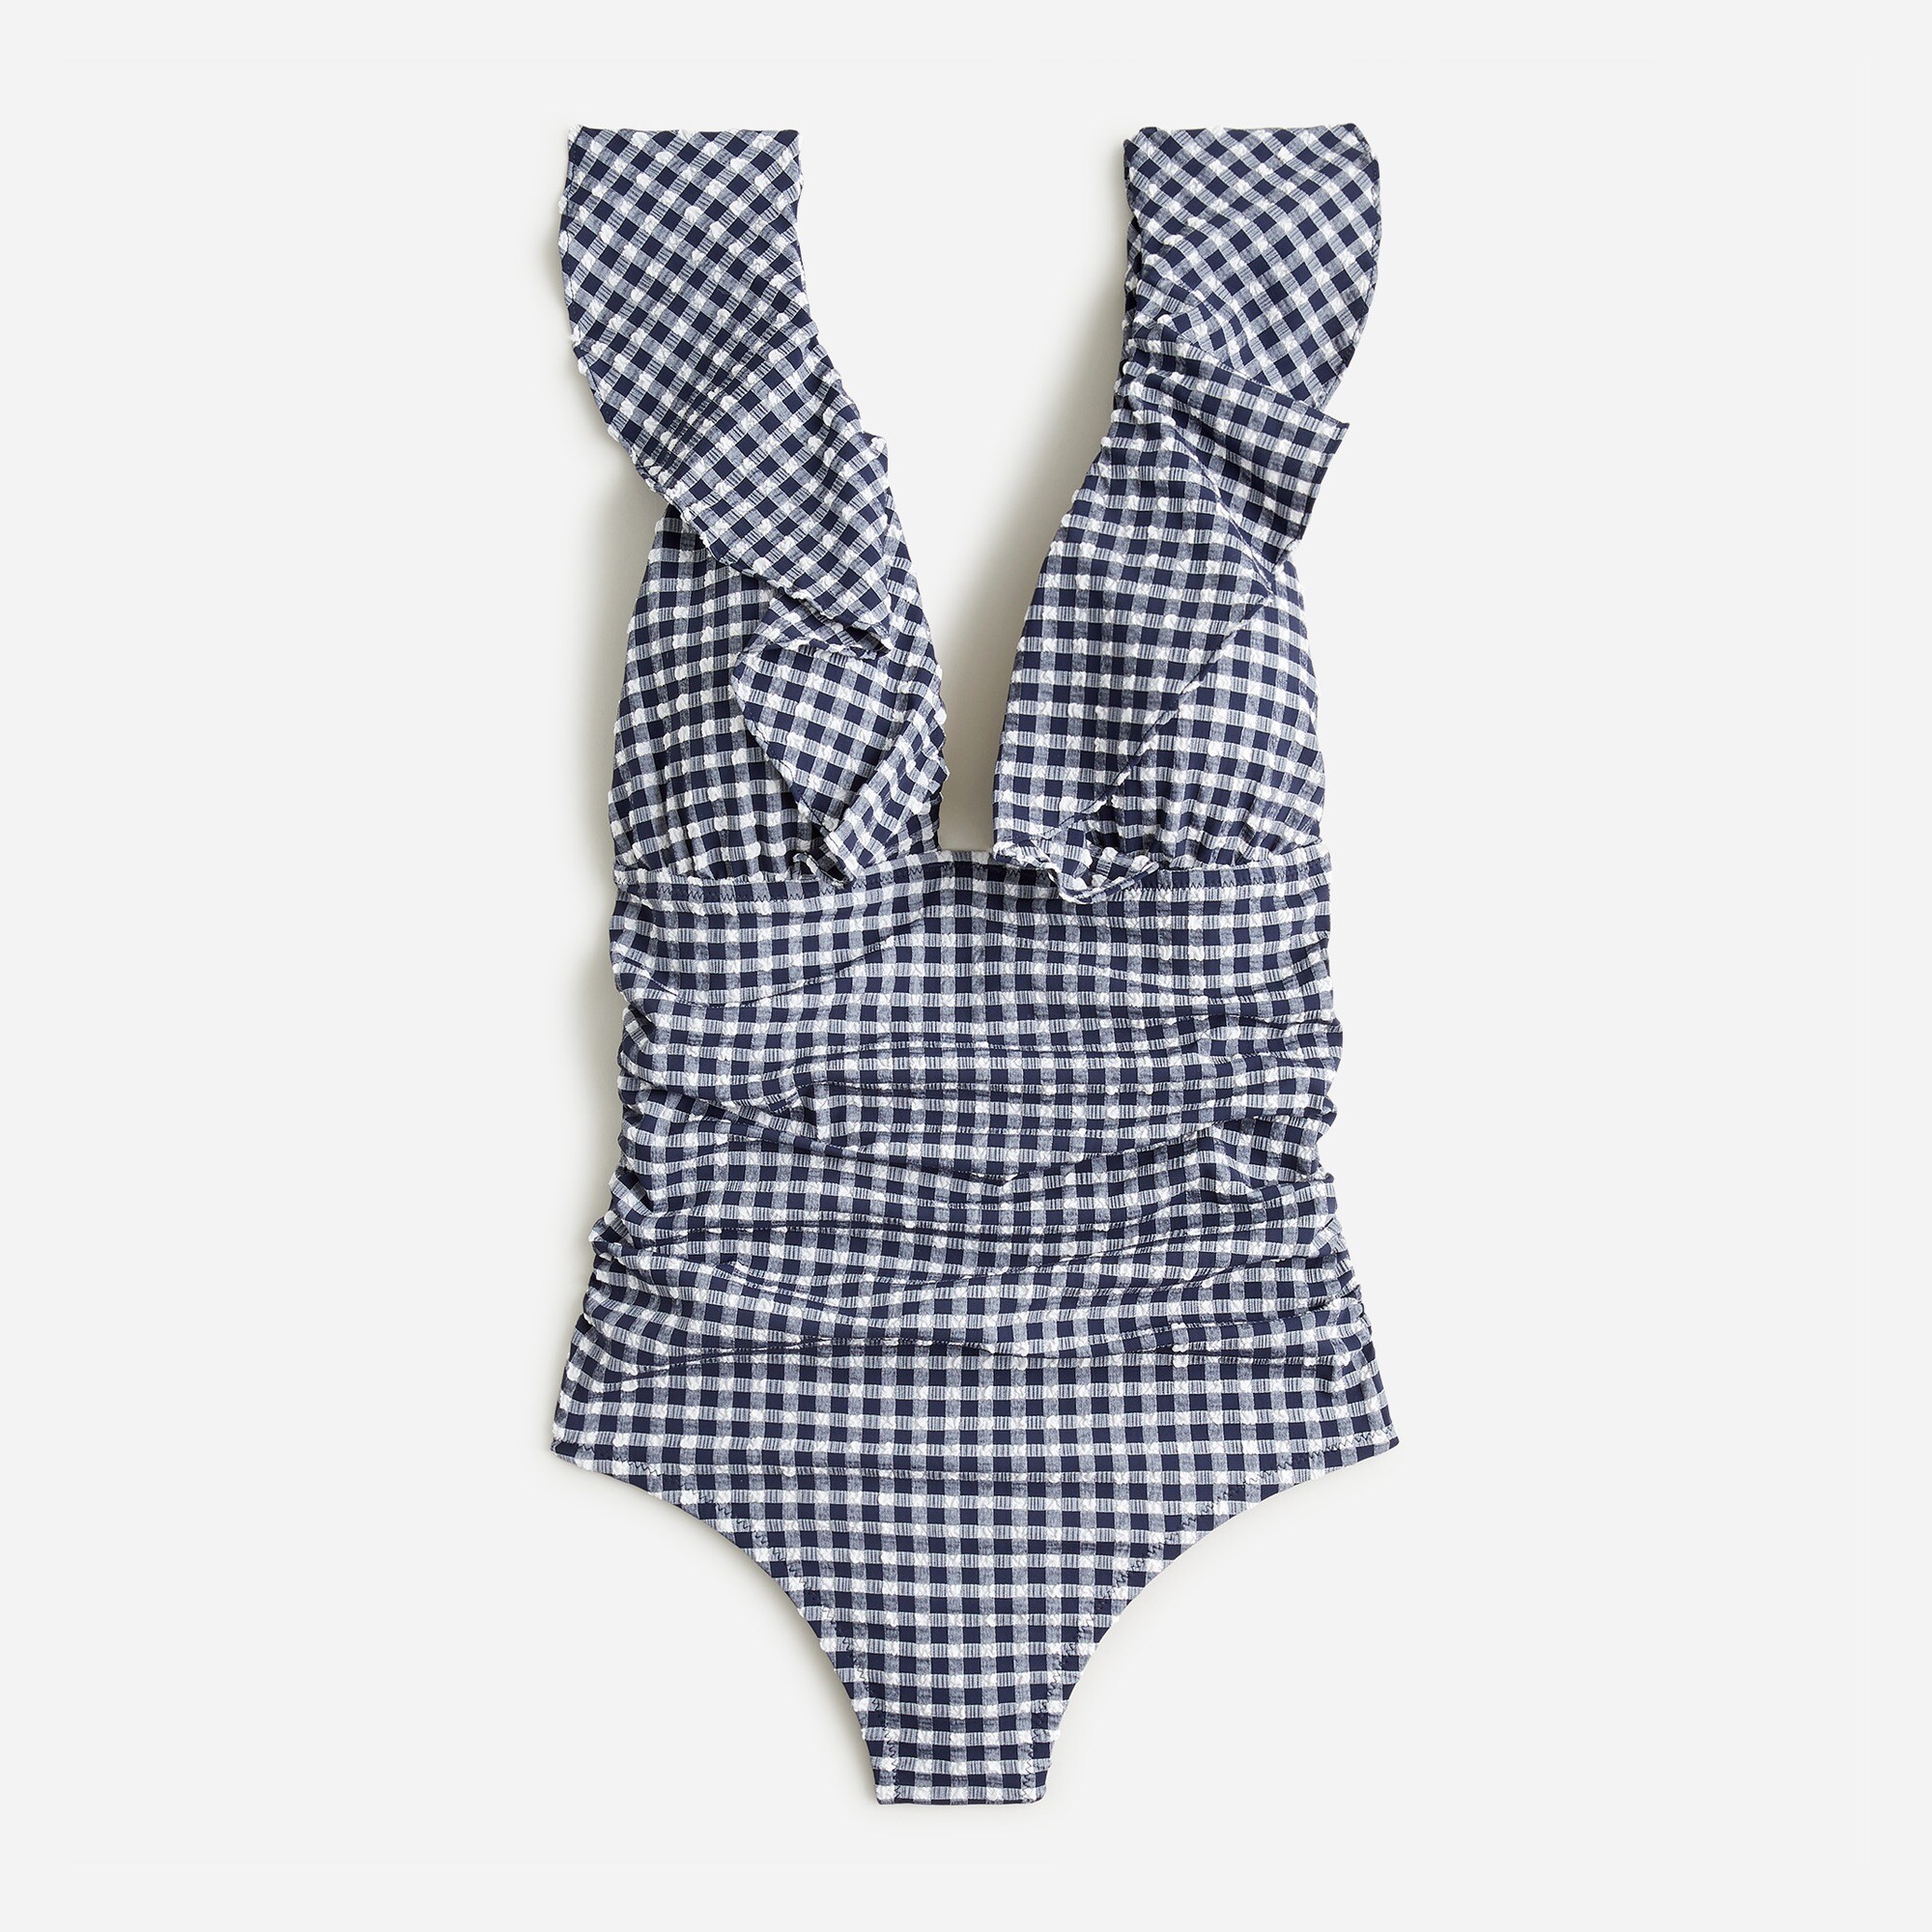  Ruched ruffle one-piece swimsuit in classic gingham